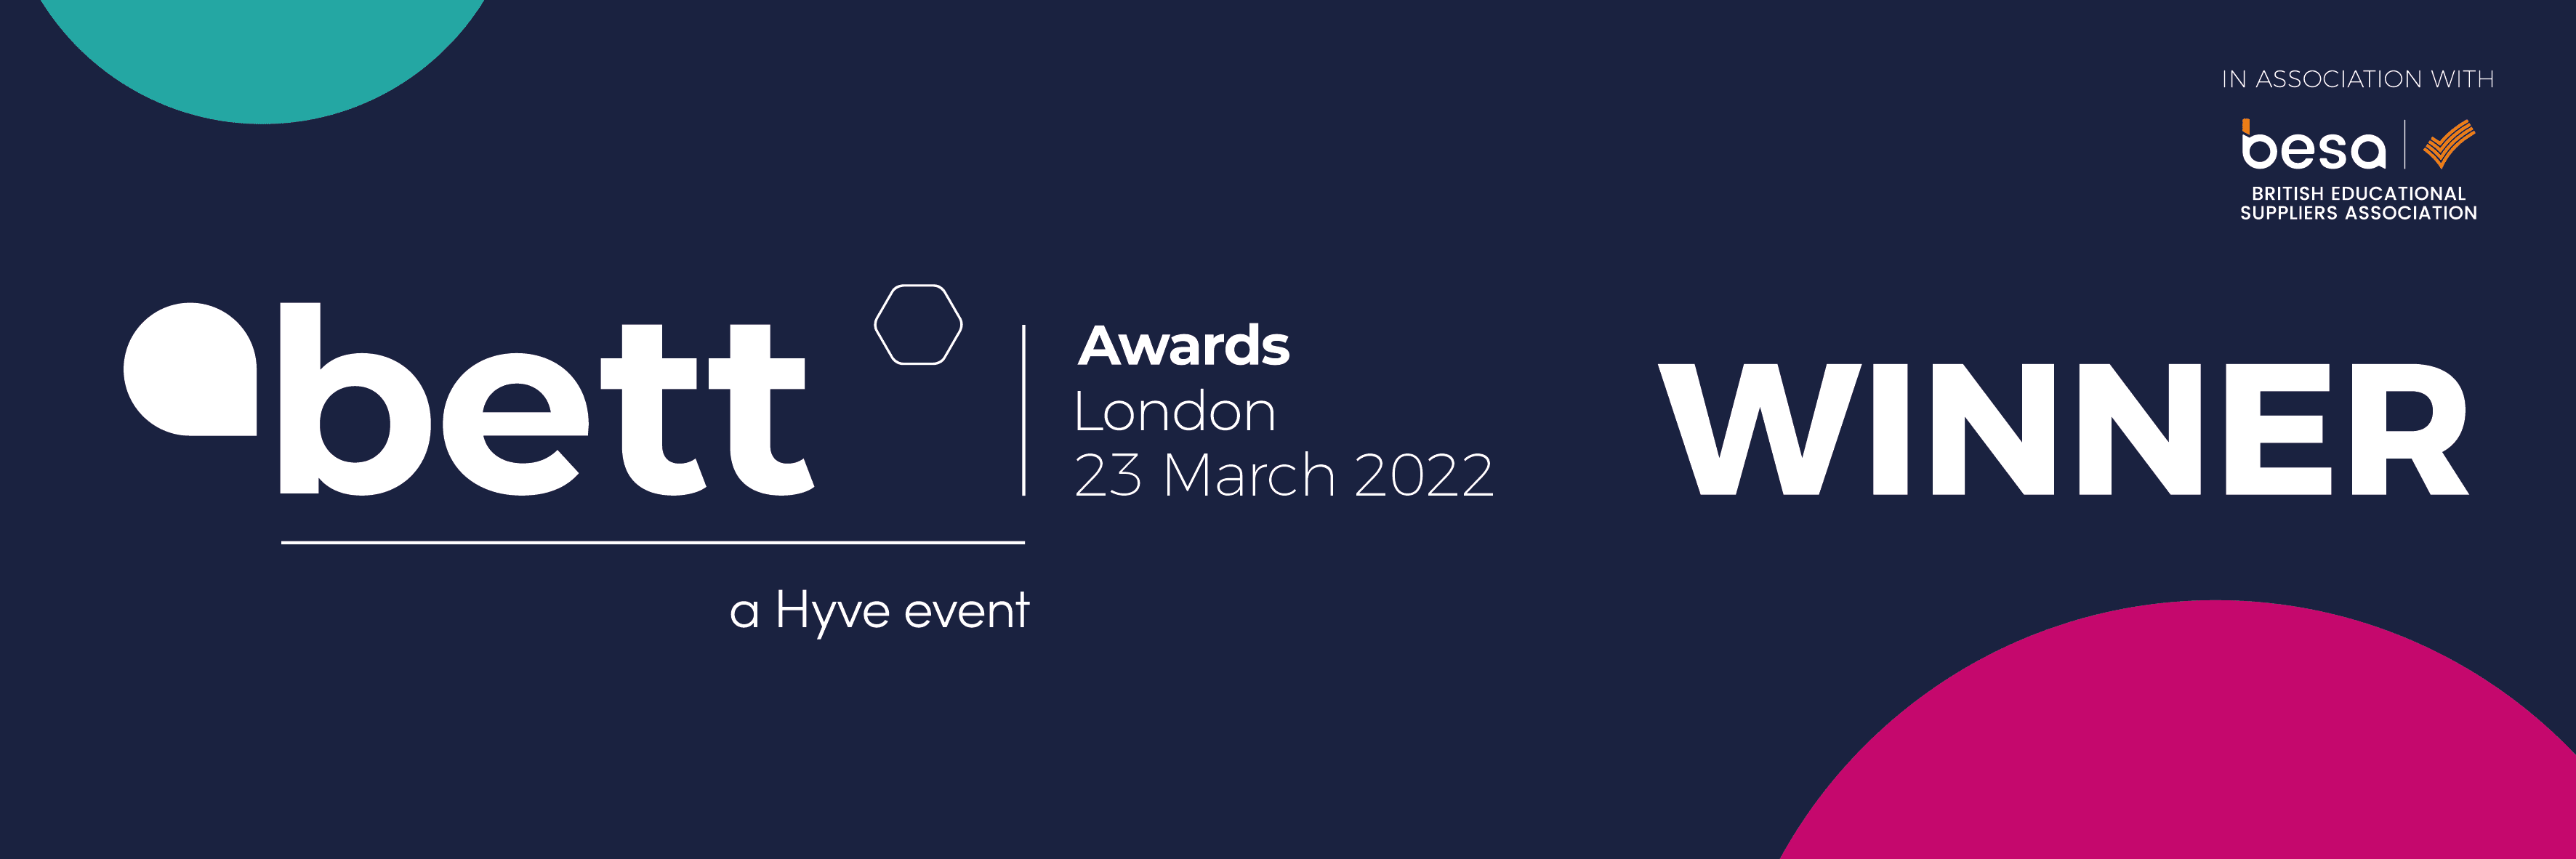 Navy blue background with white text stating "bett awards winner, London, 23 March 2022